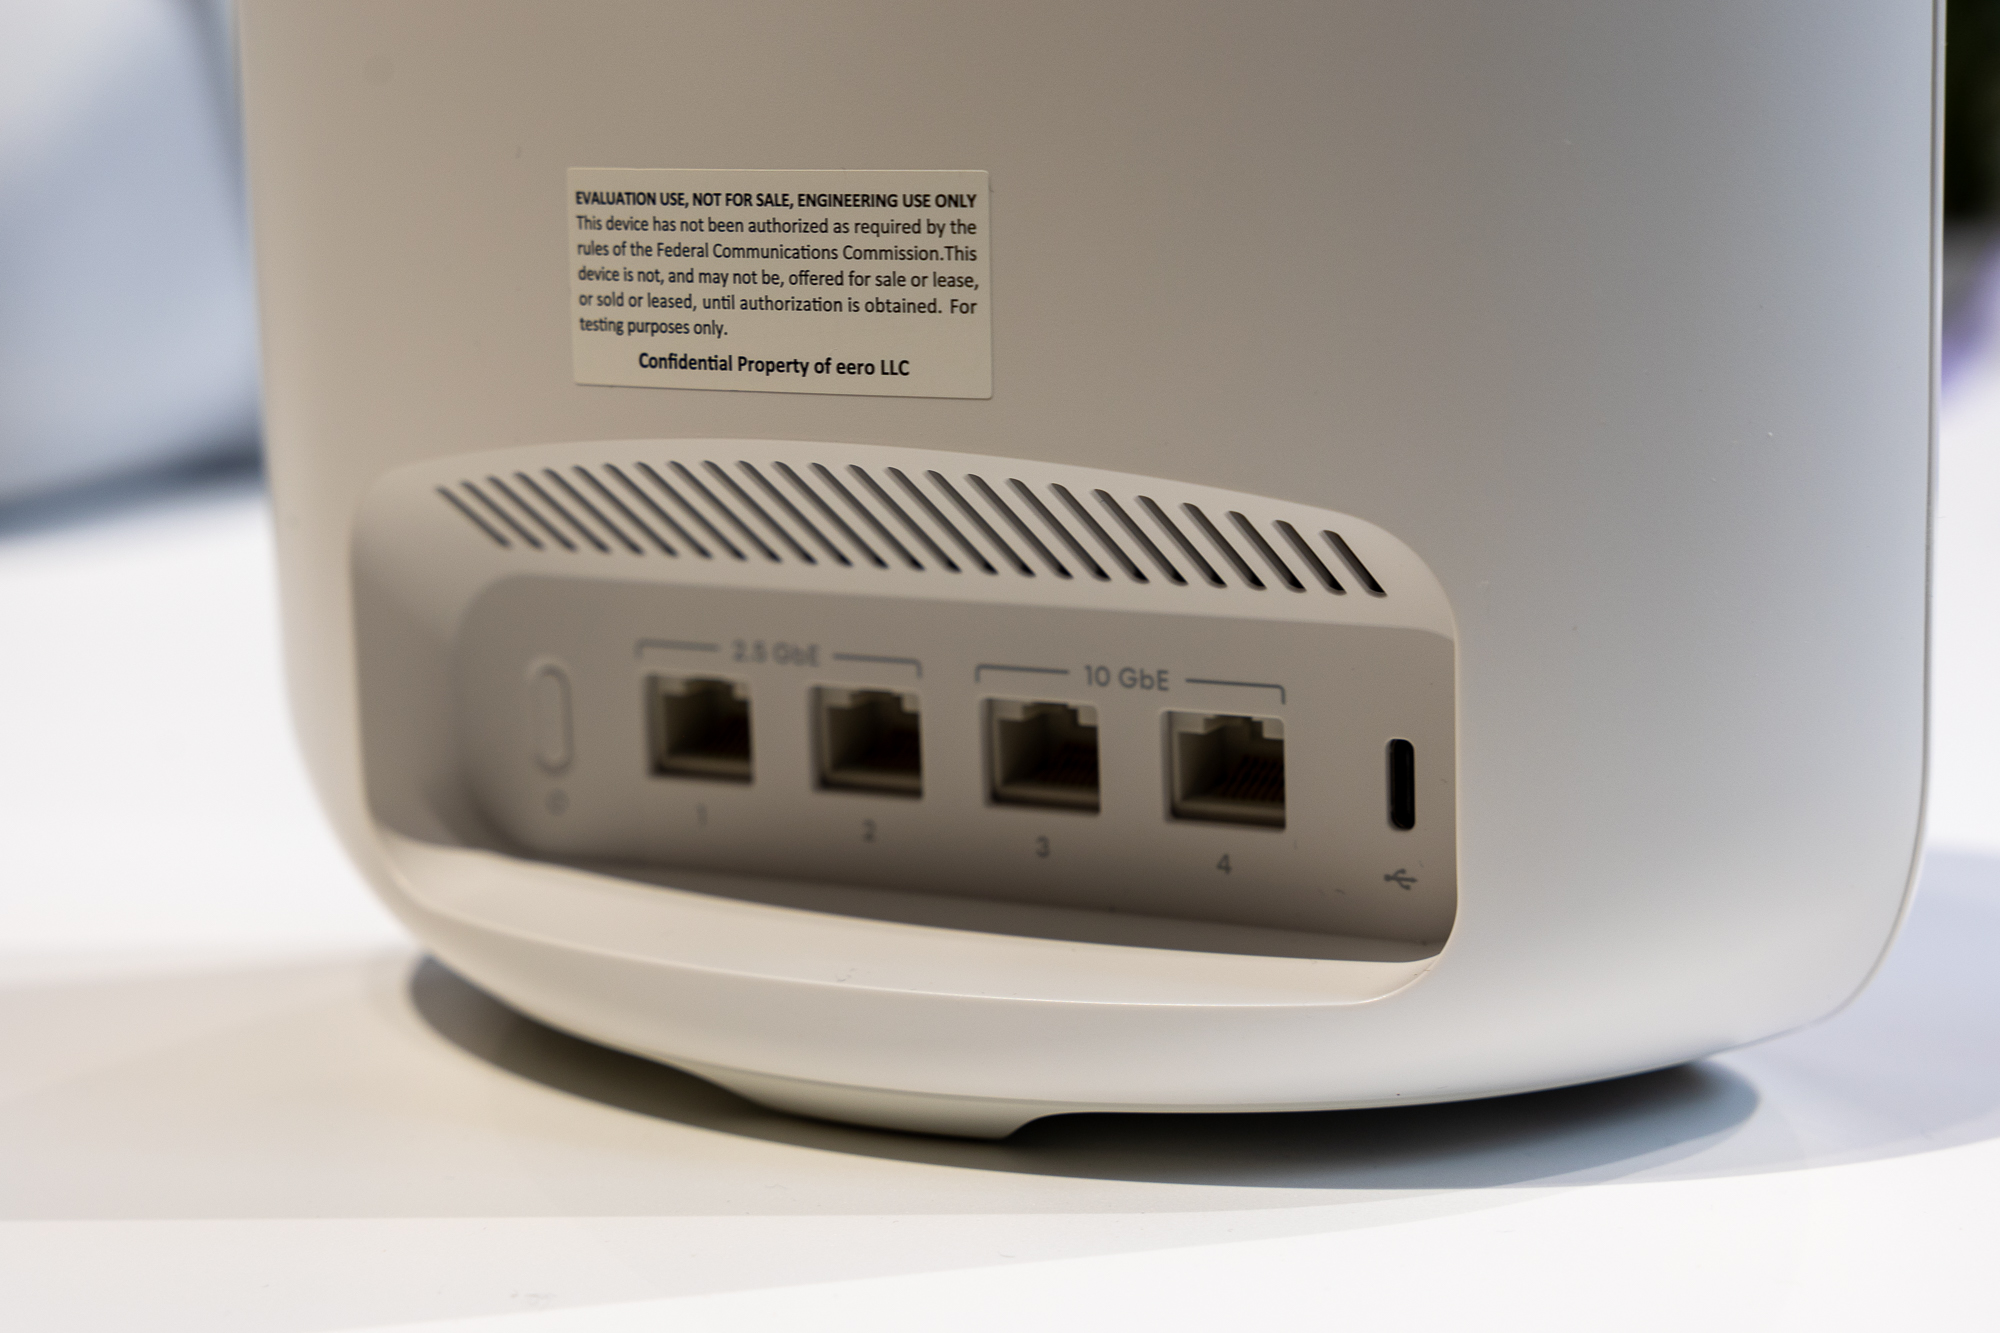 Eero Max 7 mesh Wi-Fi system review